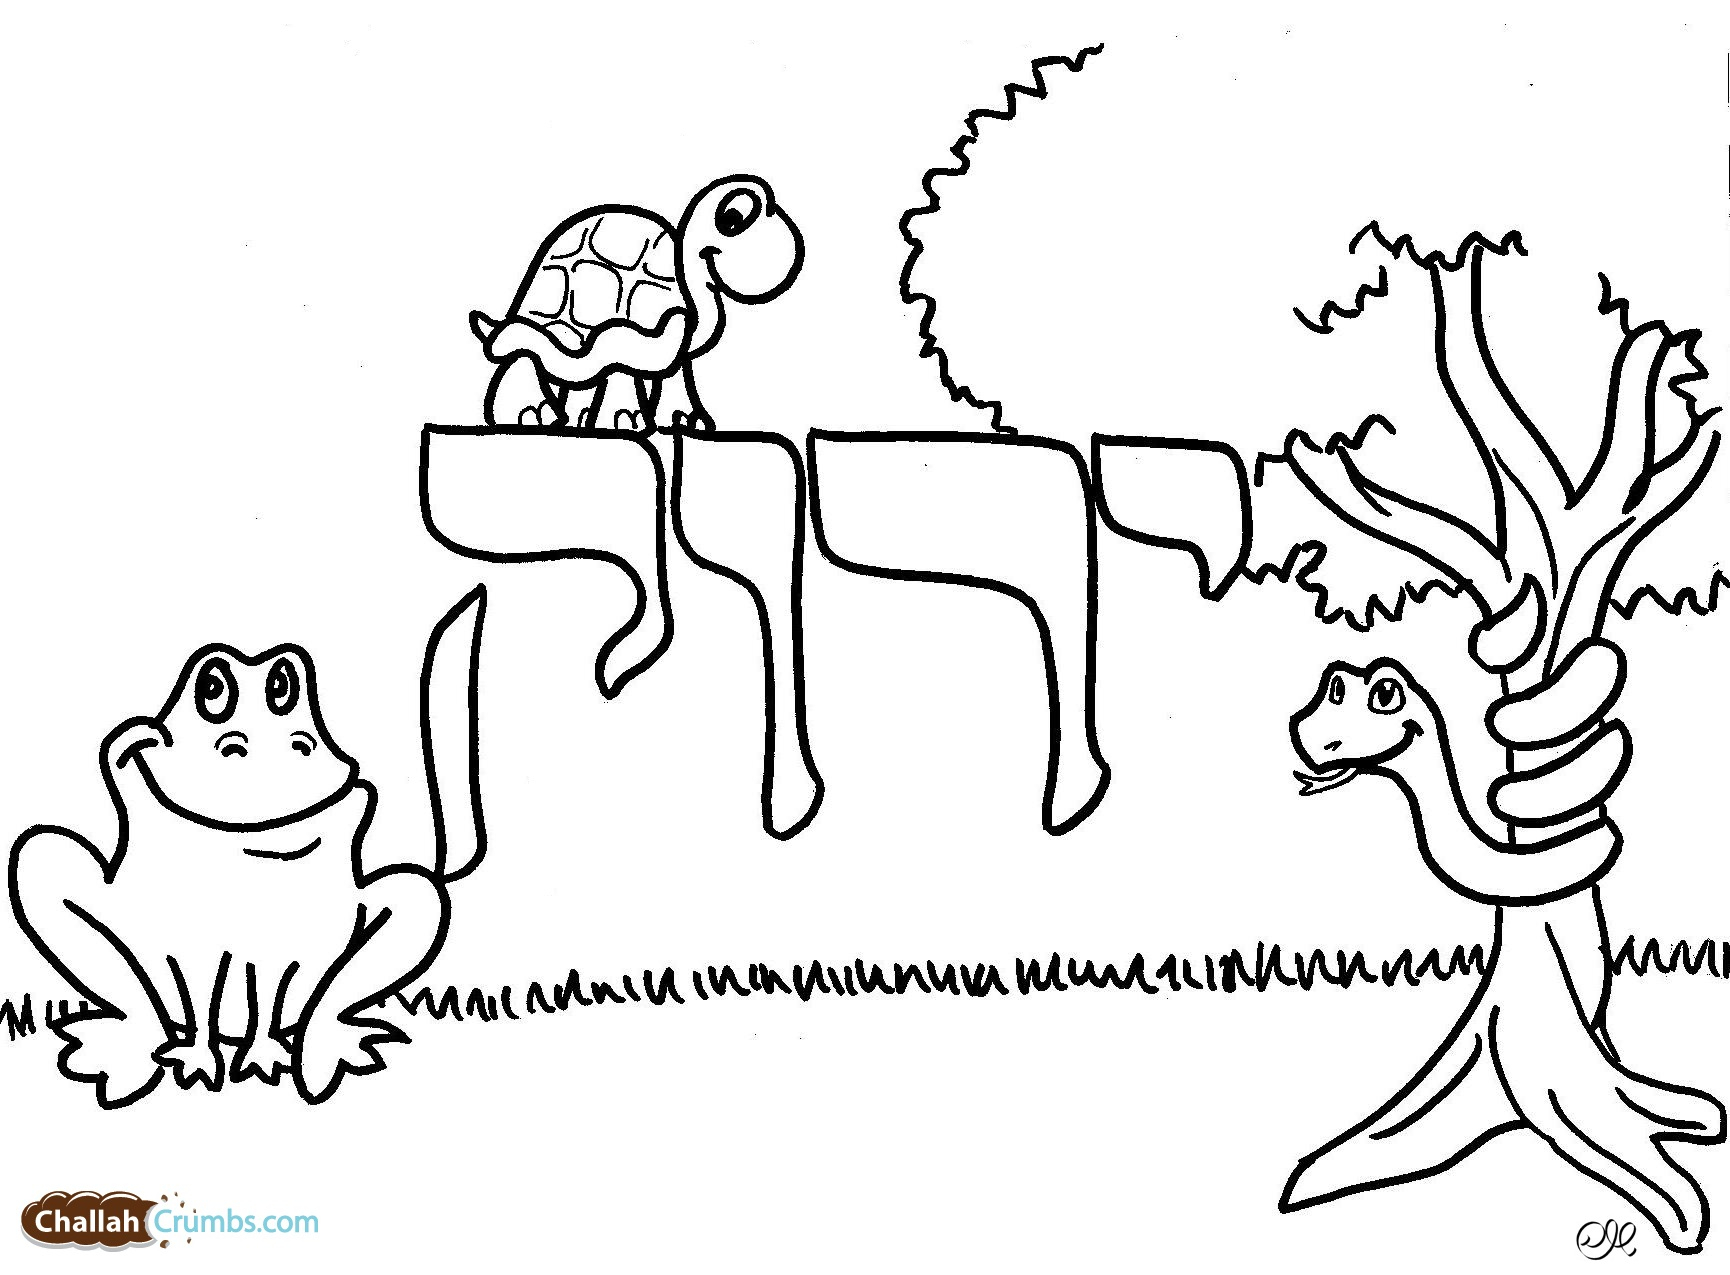 Colors Coloring Pages Colors Archives Challah Crumbs